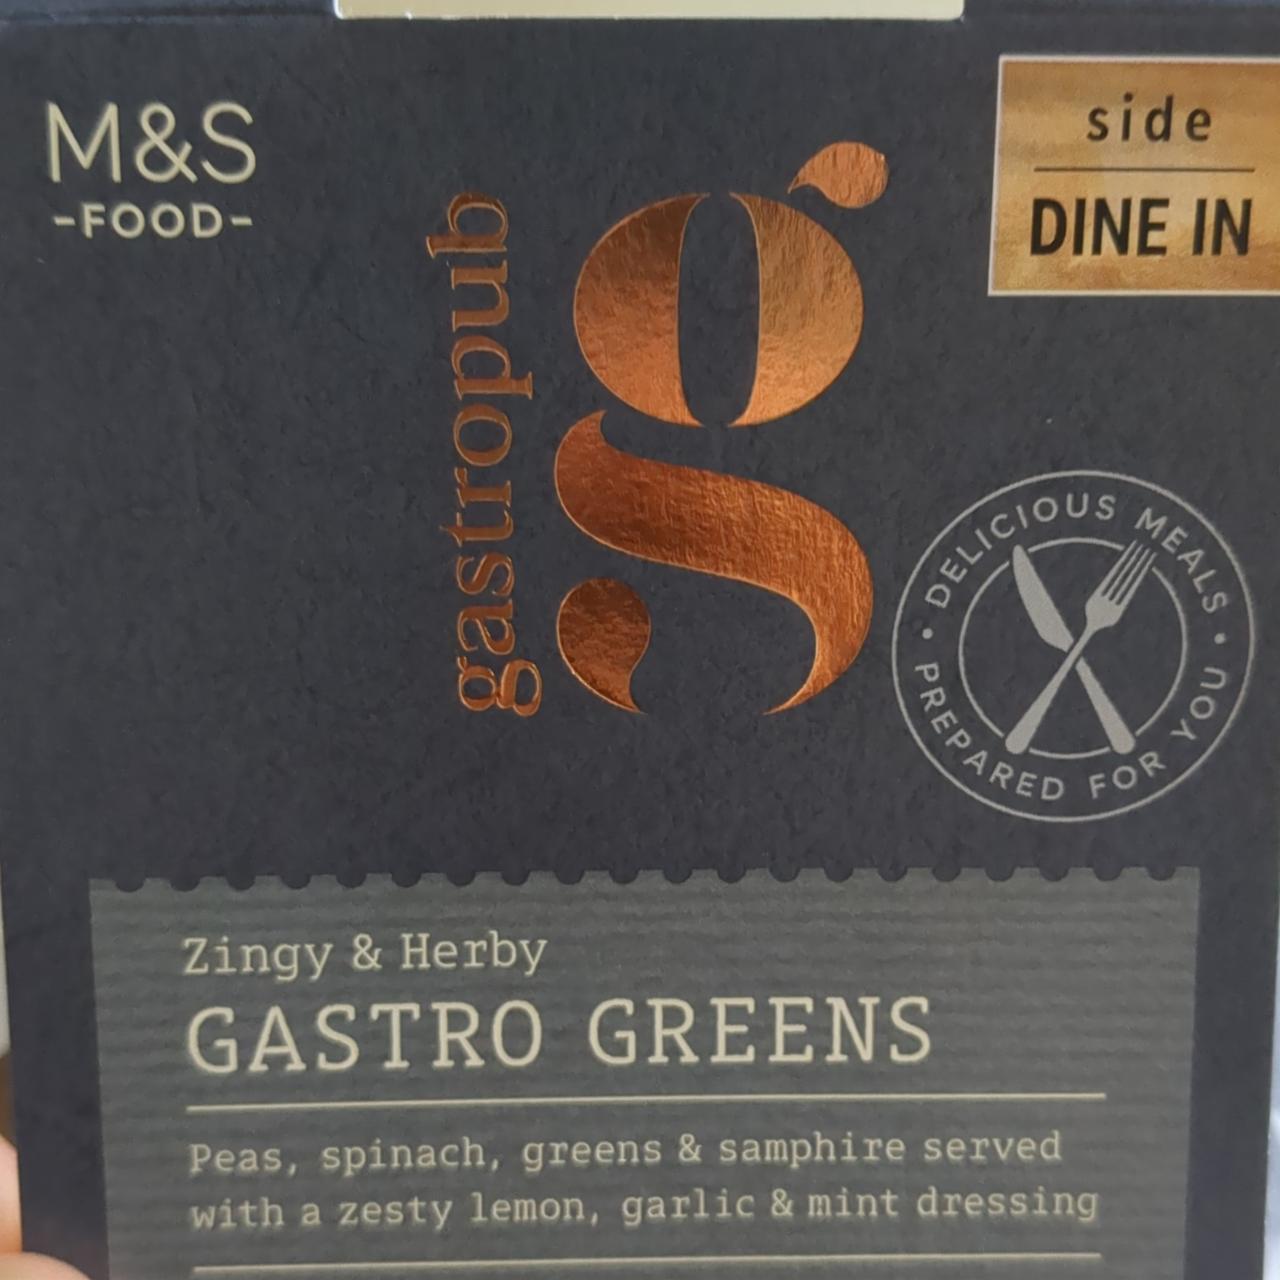 Fotografie - Zingy & Herby Gastro Greens M&S Food